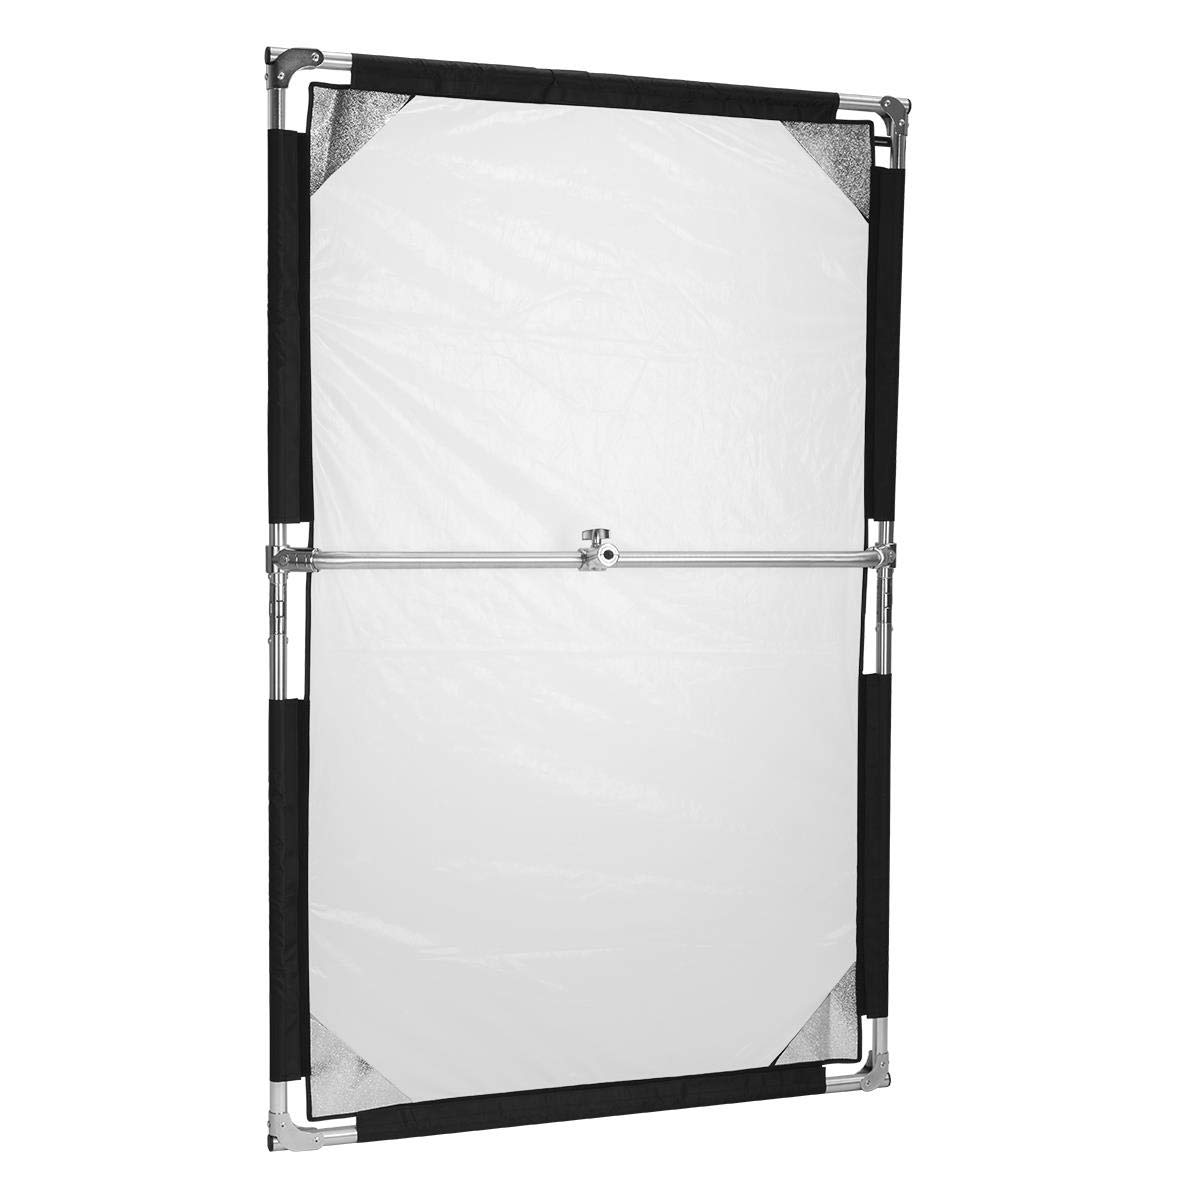 Glow Reflector Panel and Sun Scrim Kit 39" x 62" with Handle and Carry Bag (100 x 156cm)